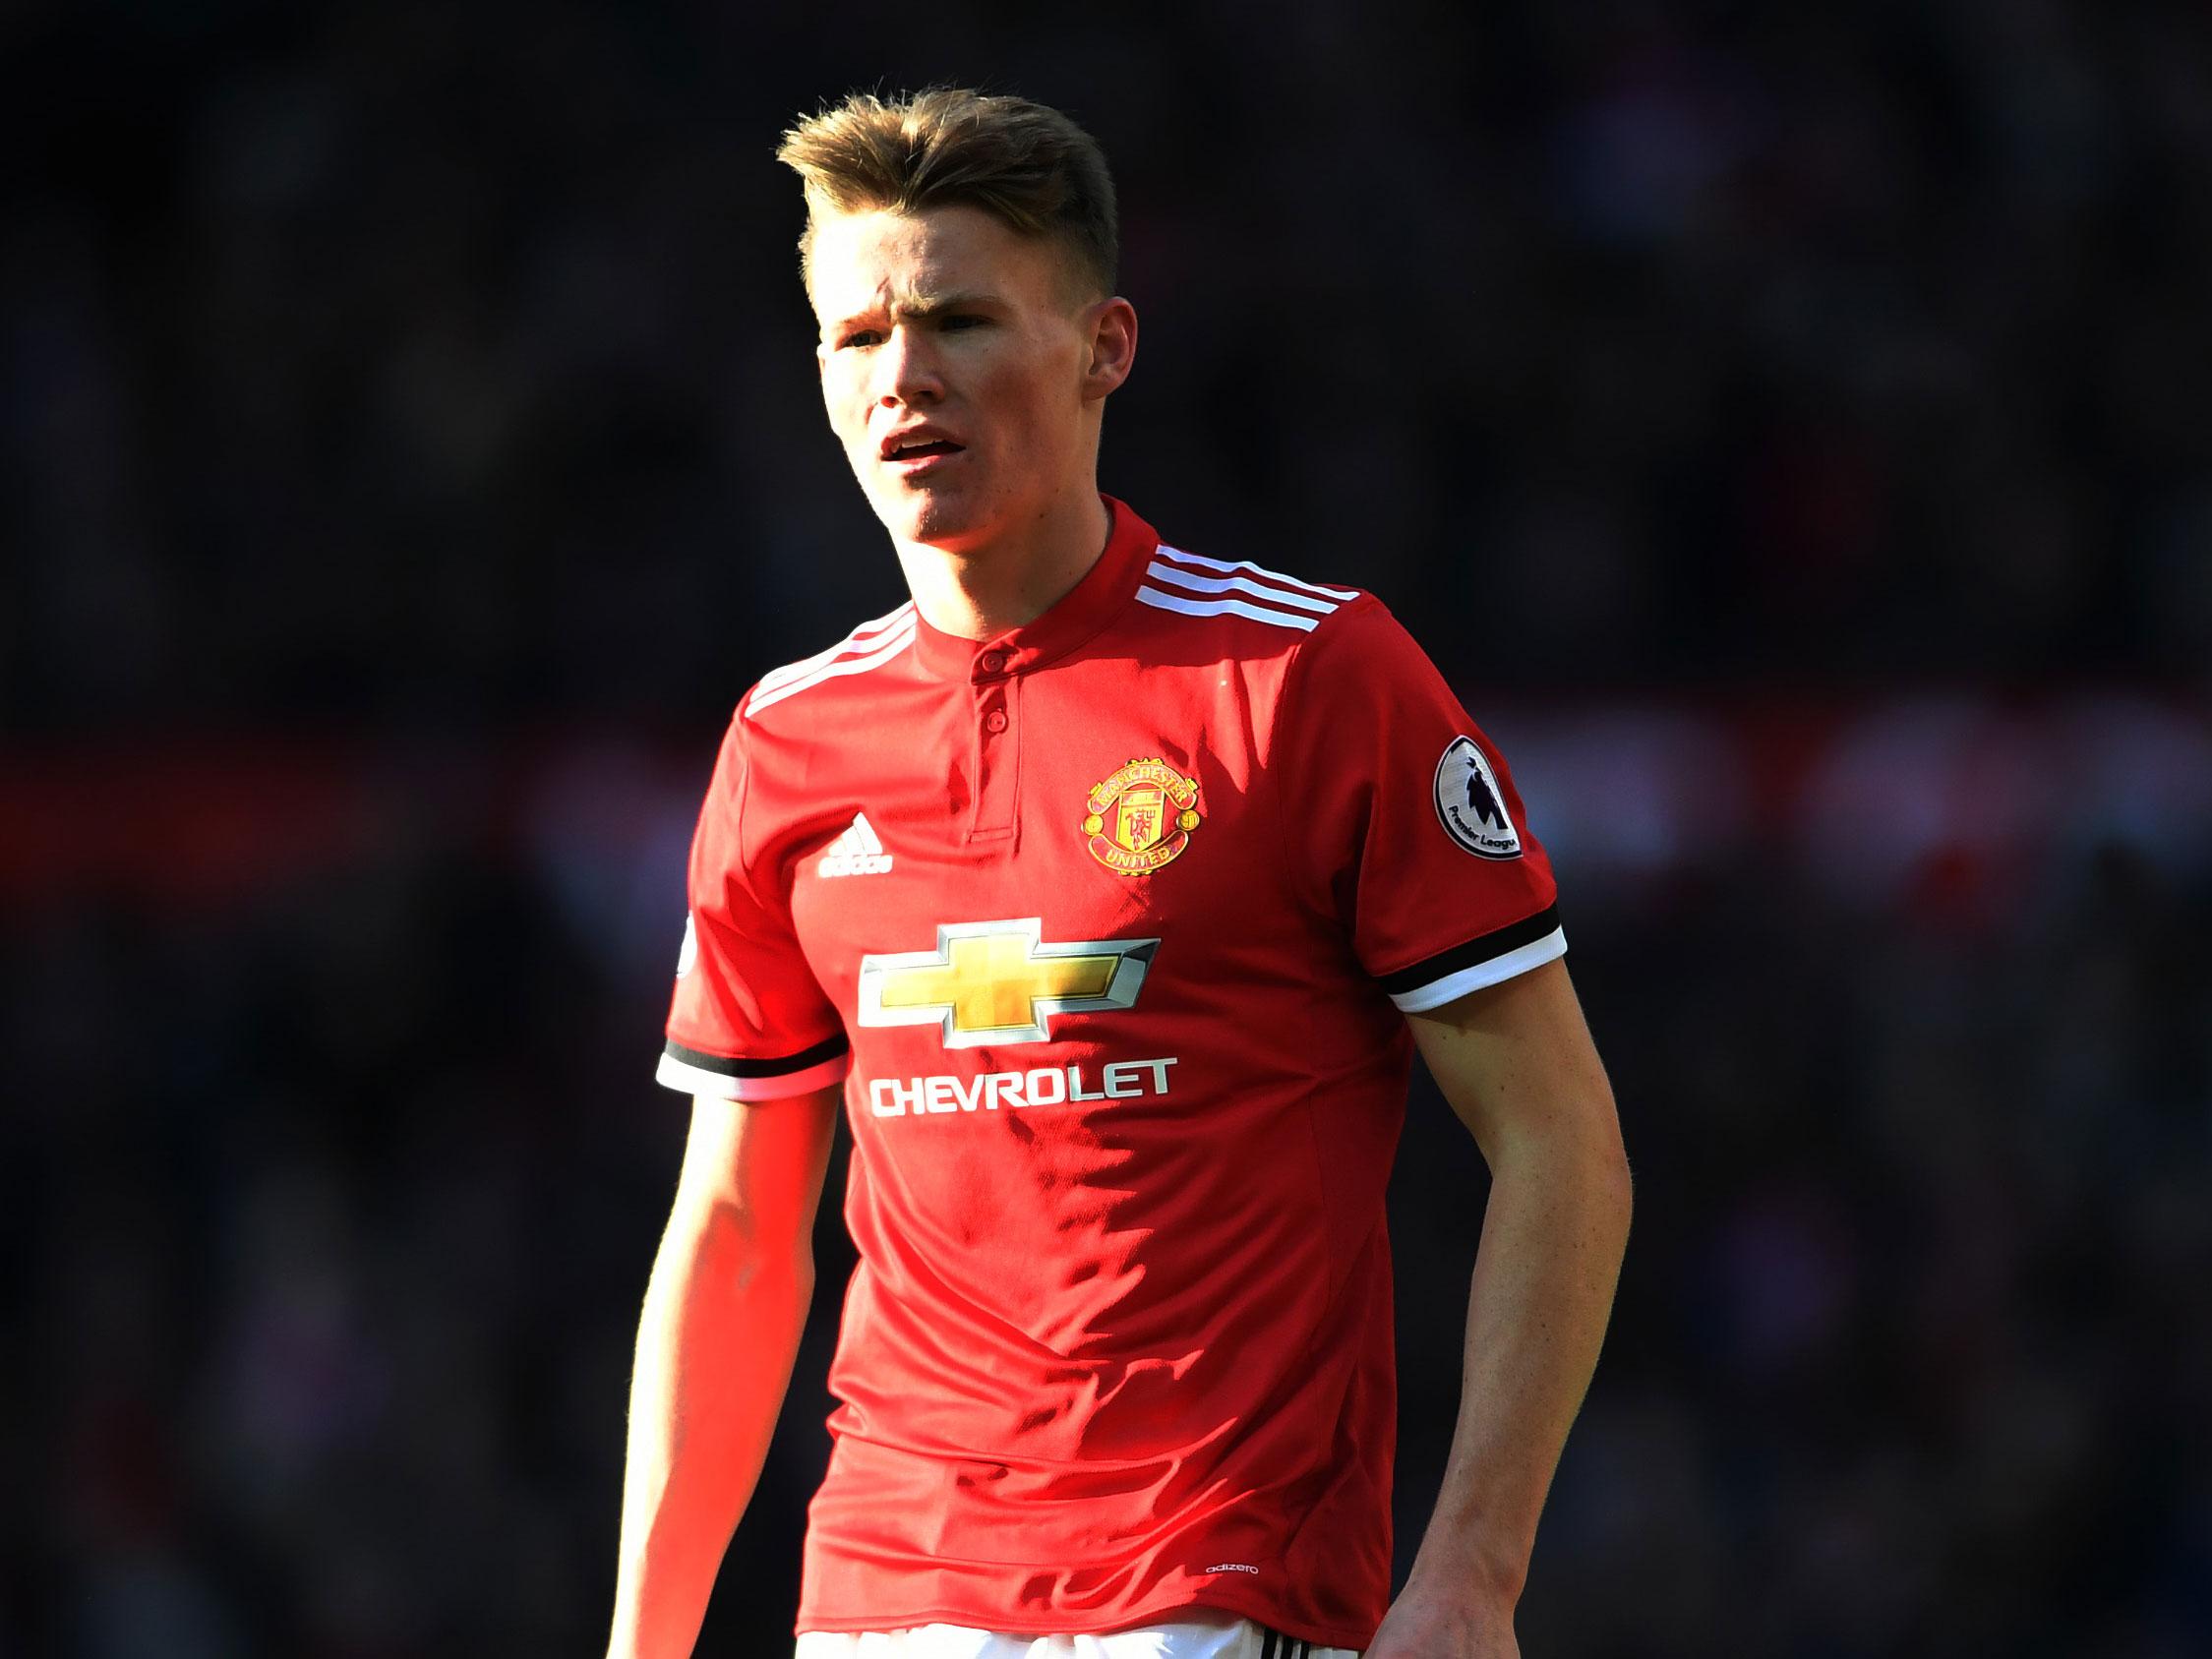 Scott McTominay is one of Jose Mourinho's go-to players